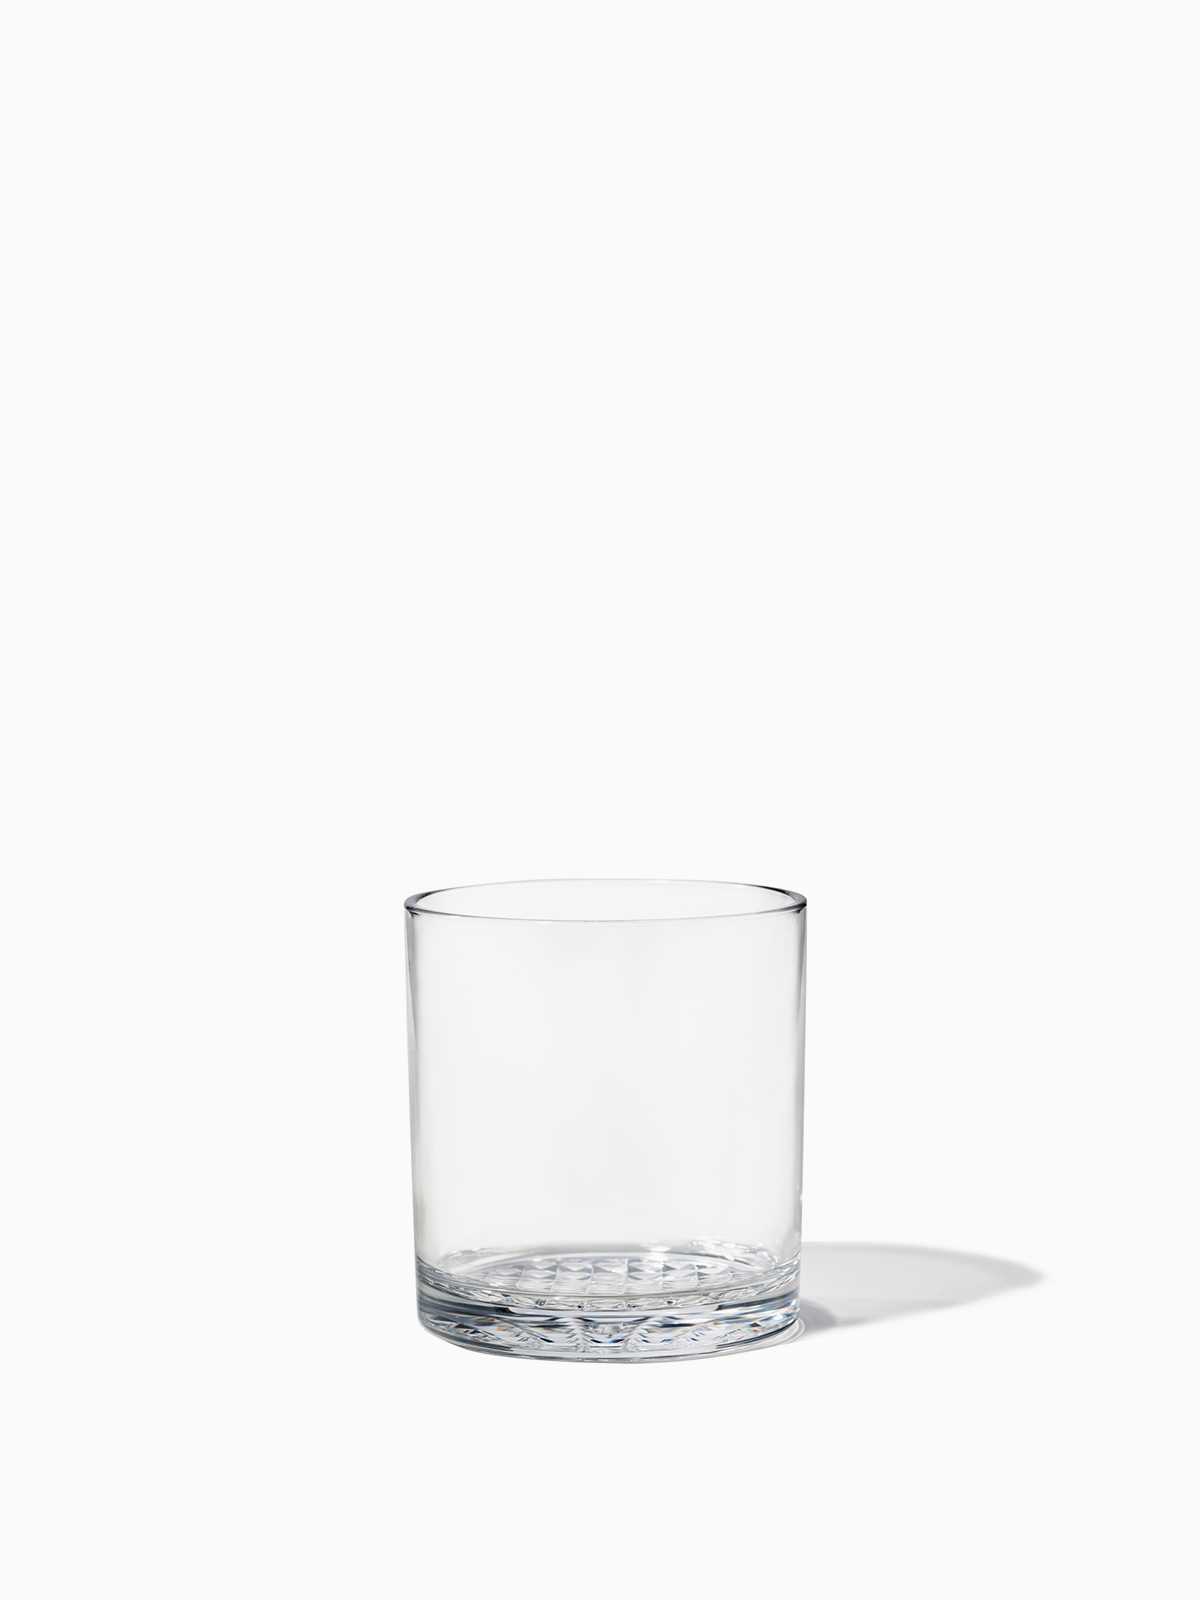 RESERVE 12oz Old Fashioned MS Copolyester Glass - Bulk-0